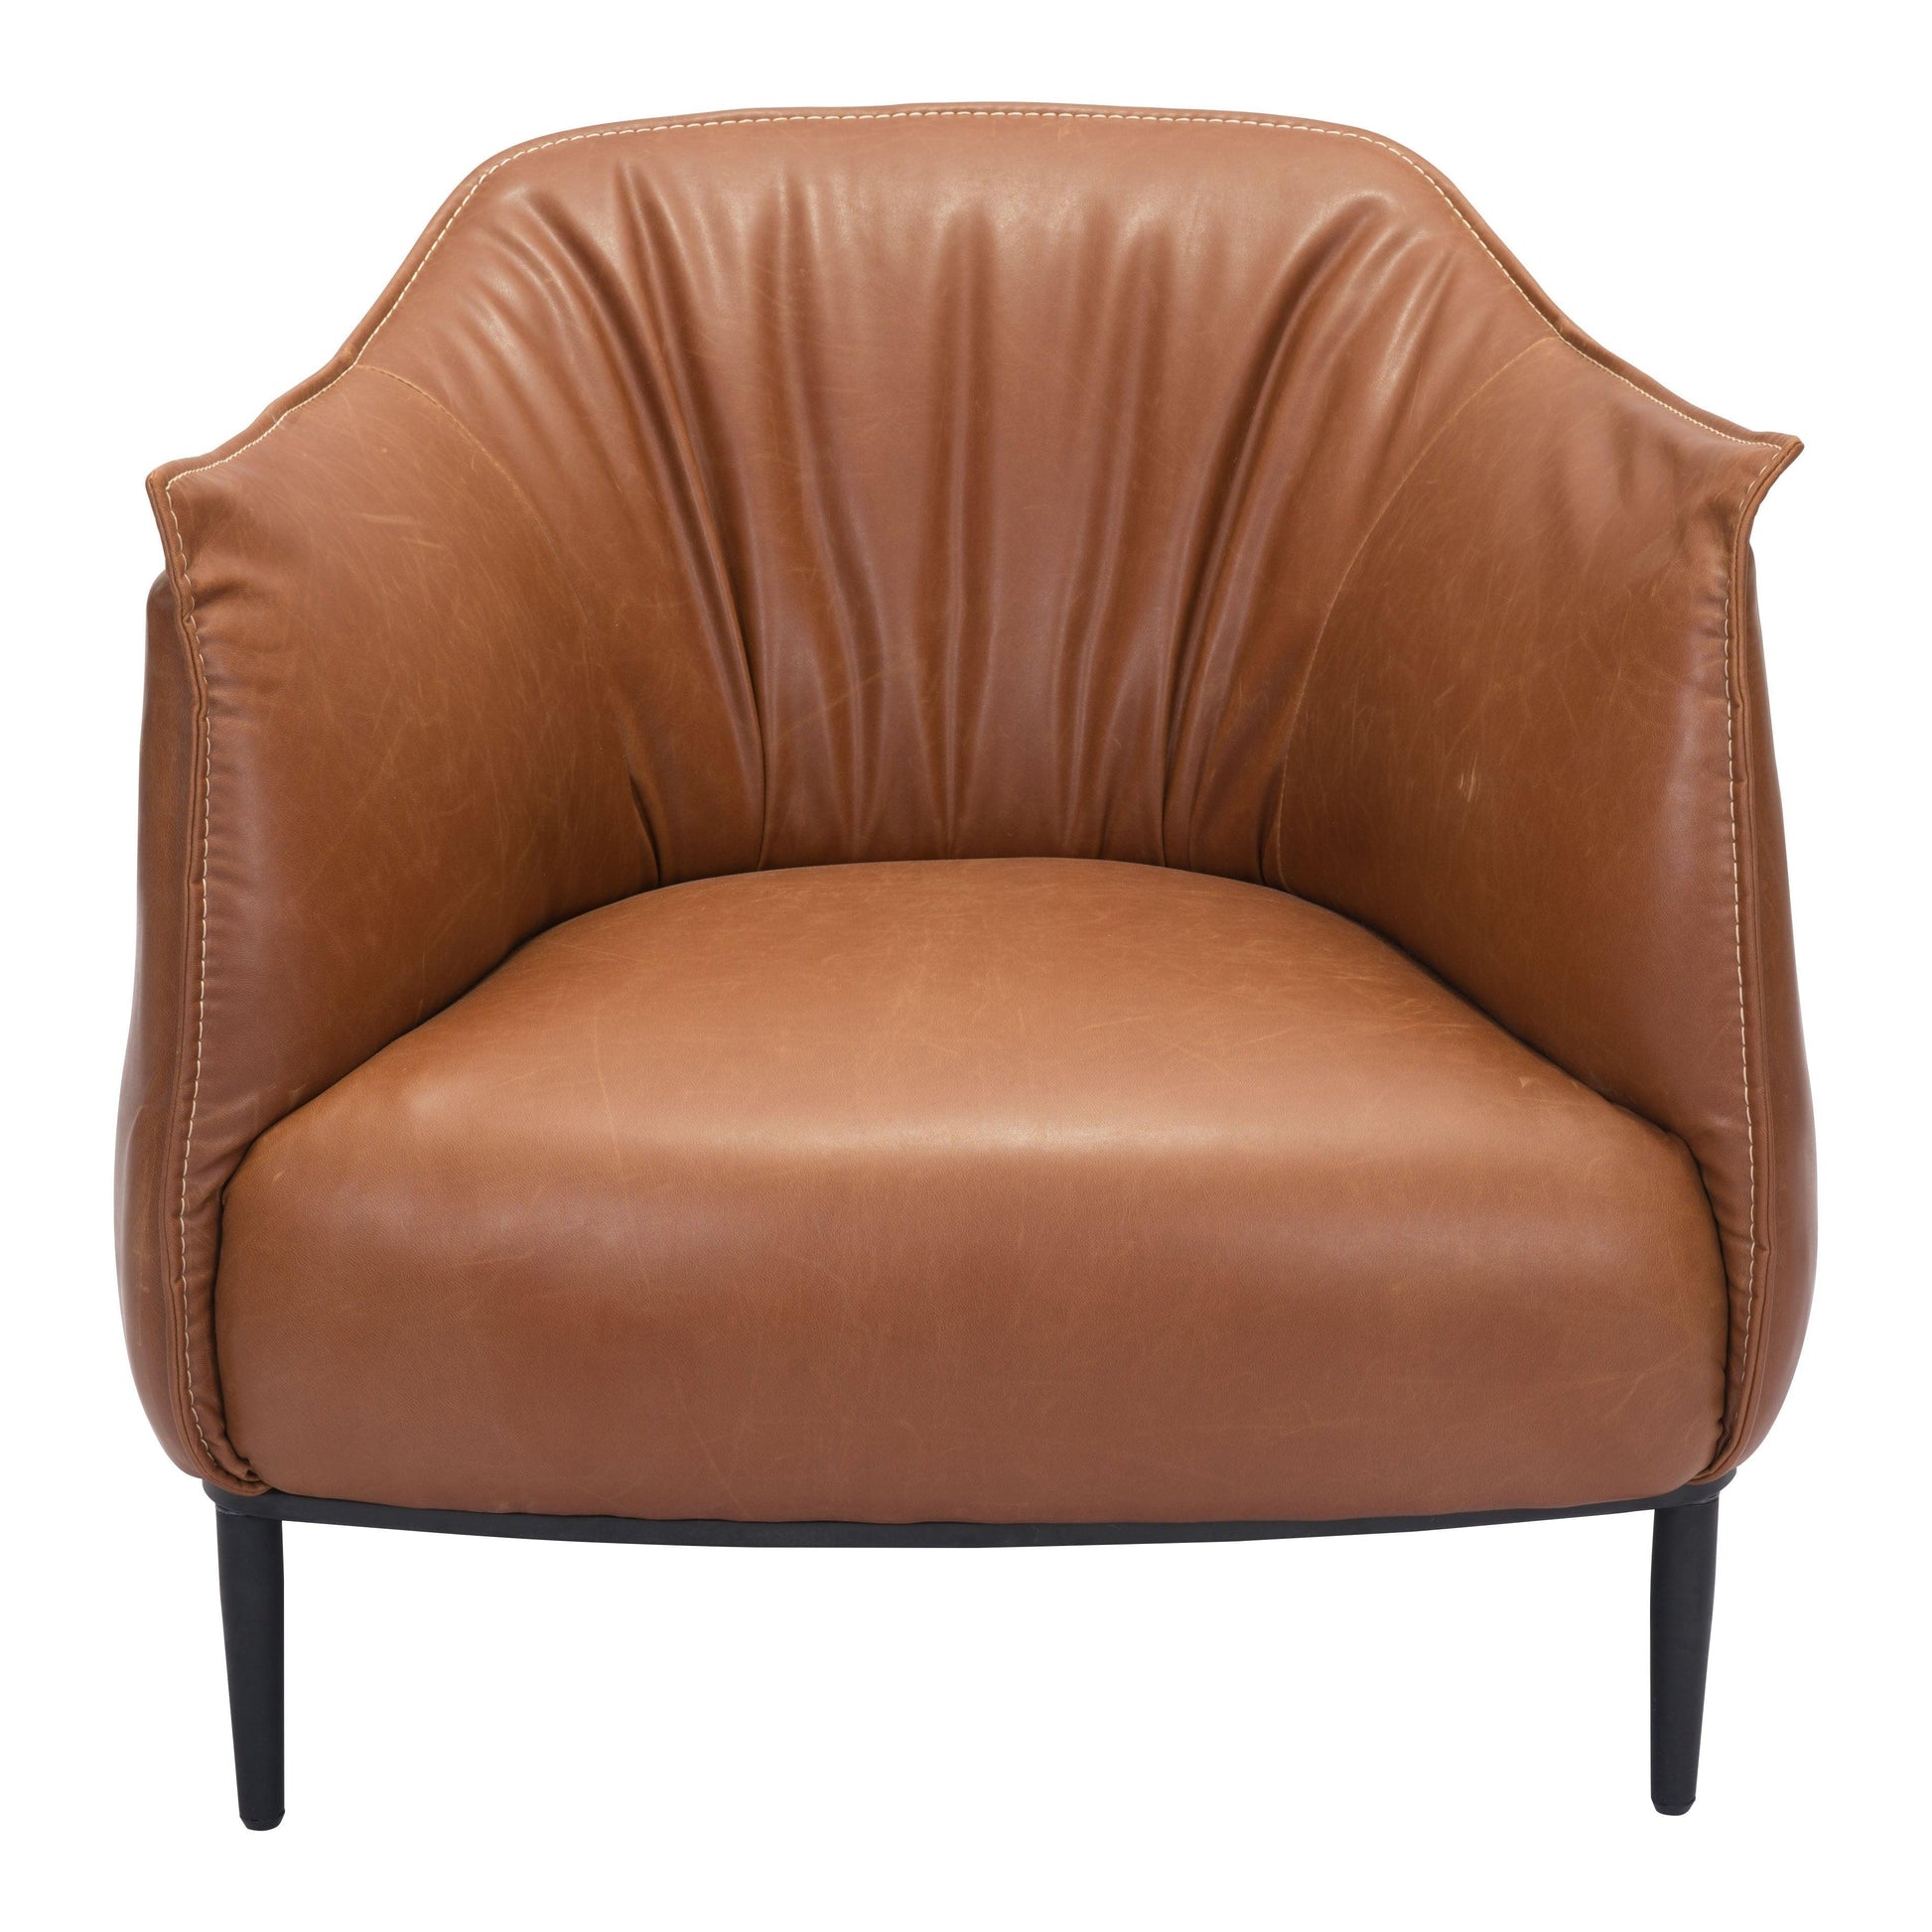 Julian Occasional Chair Coffee - Sideboards and Things Brand_Zuo Modern, Color_Brown, Finish_Powder Coated, Materials_Metal, Materials_Upholstery, Metal Type_Steel, Product Type_Occasional Chair, Upholstery Type_Leather, Upholstery Type_Vegan Leather